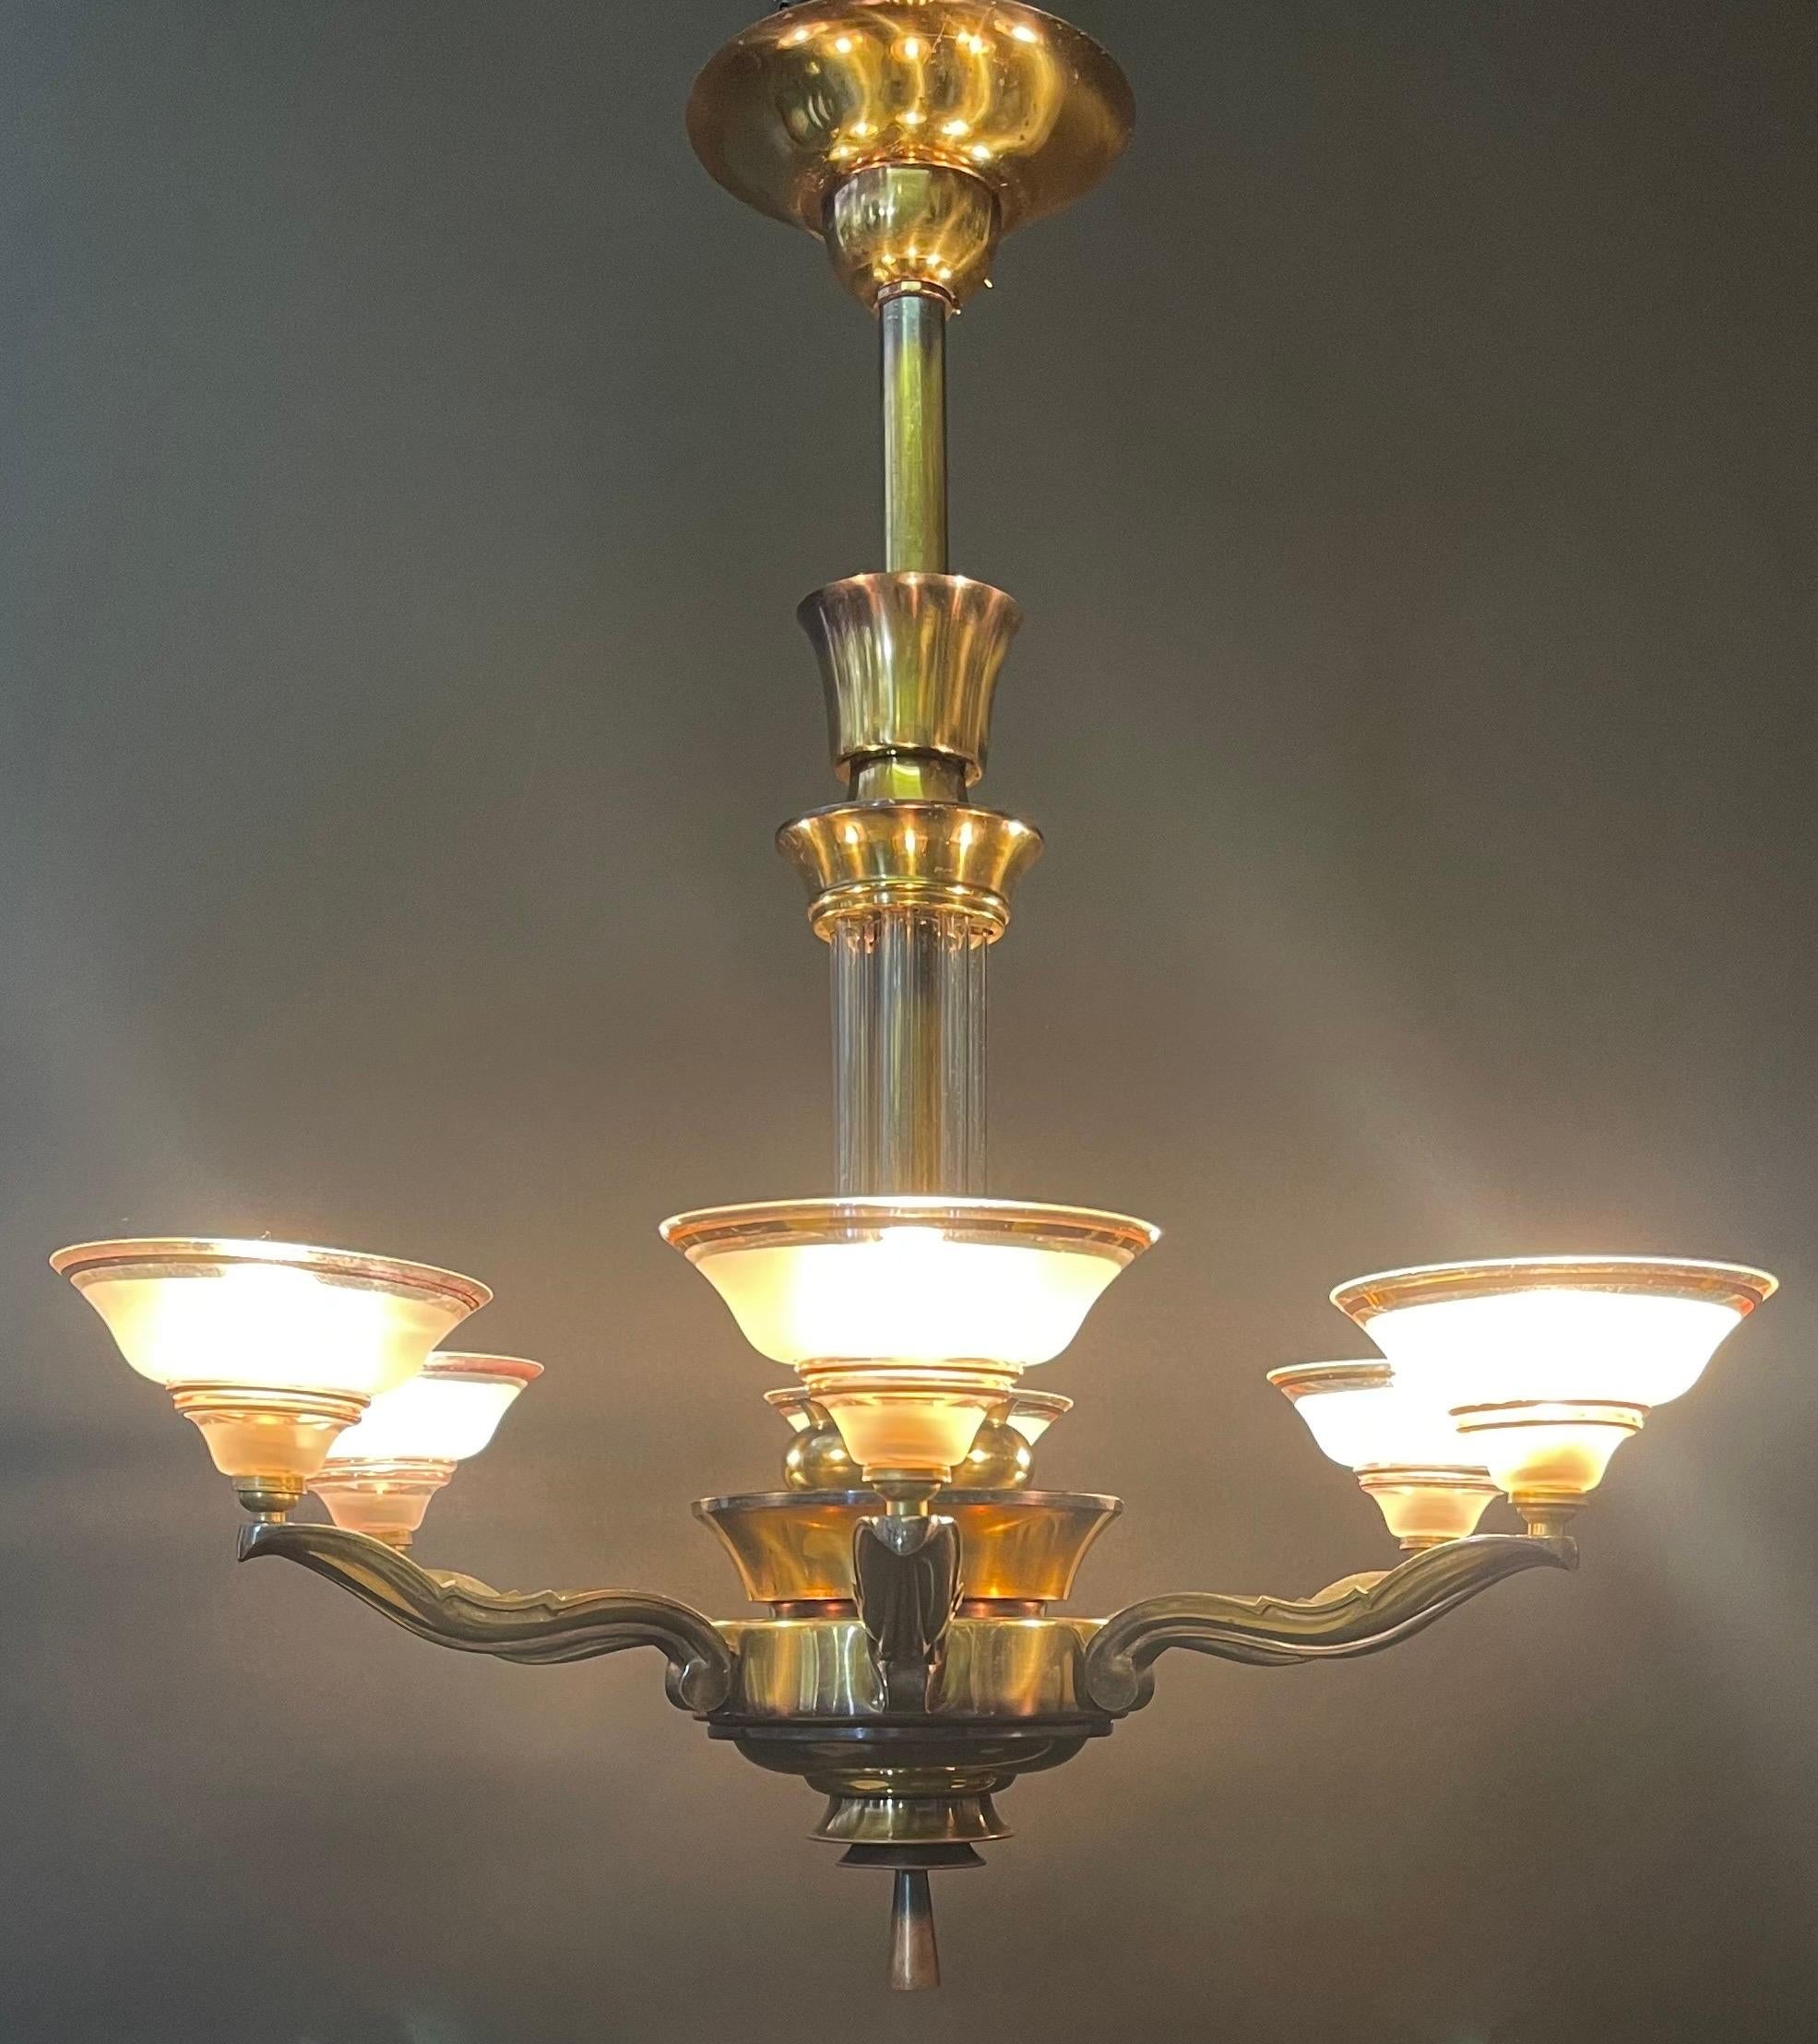 French Art Deco Chandelier Petitot Style Bronze, circa 1930s For Sale 6